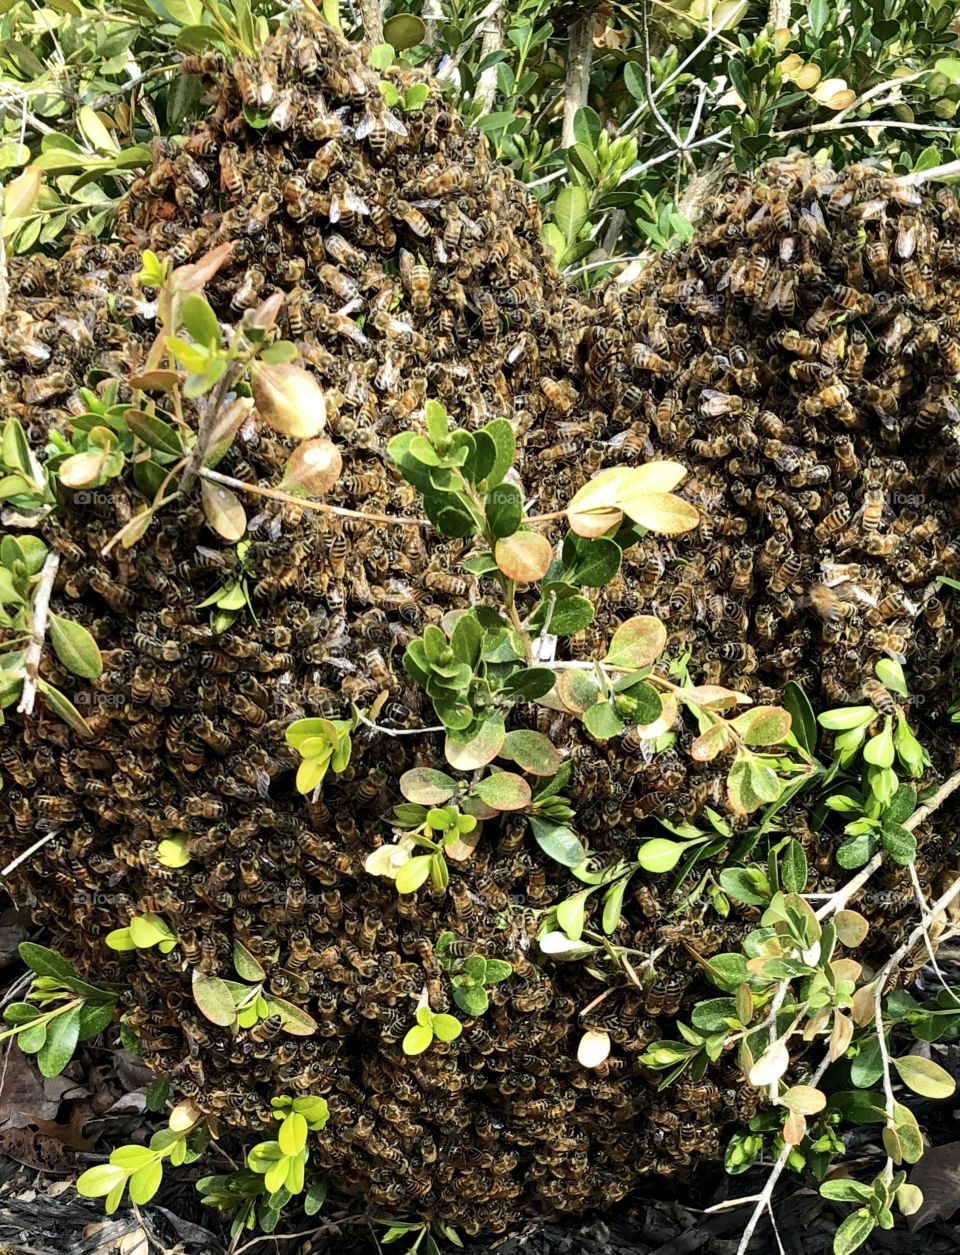 Bees, Honeybees, swarm, bush, wings, bugs, insects, leaves, bush, gold, green, branches, swarm, April 12 2018, Independence, MO, Missouri, spring, garden, flower garden,